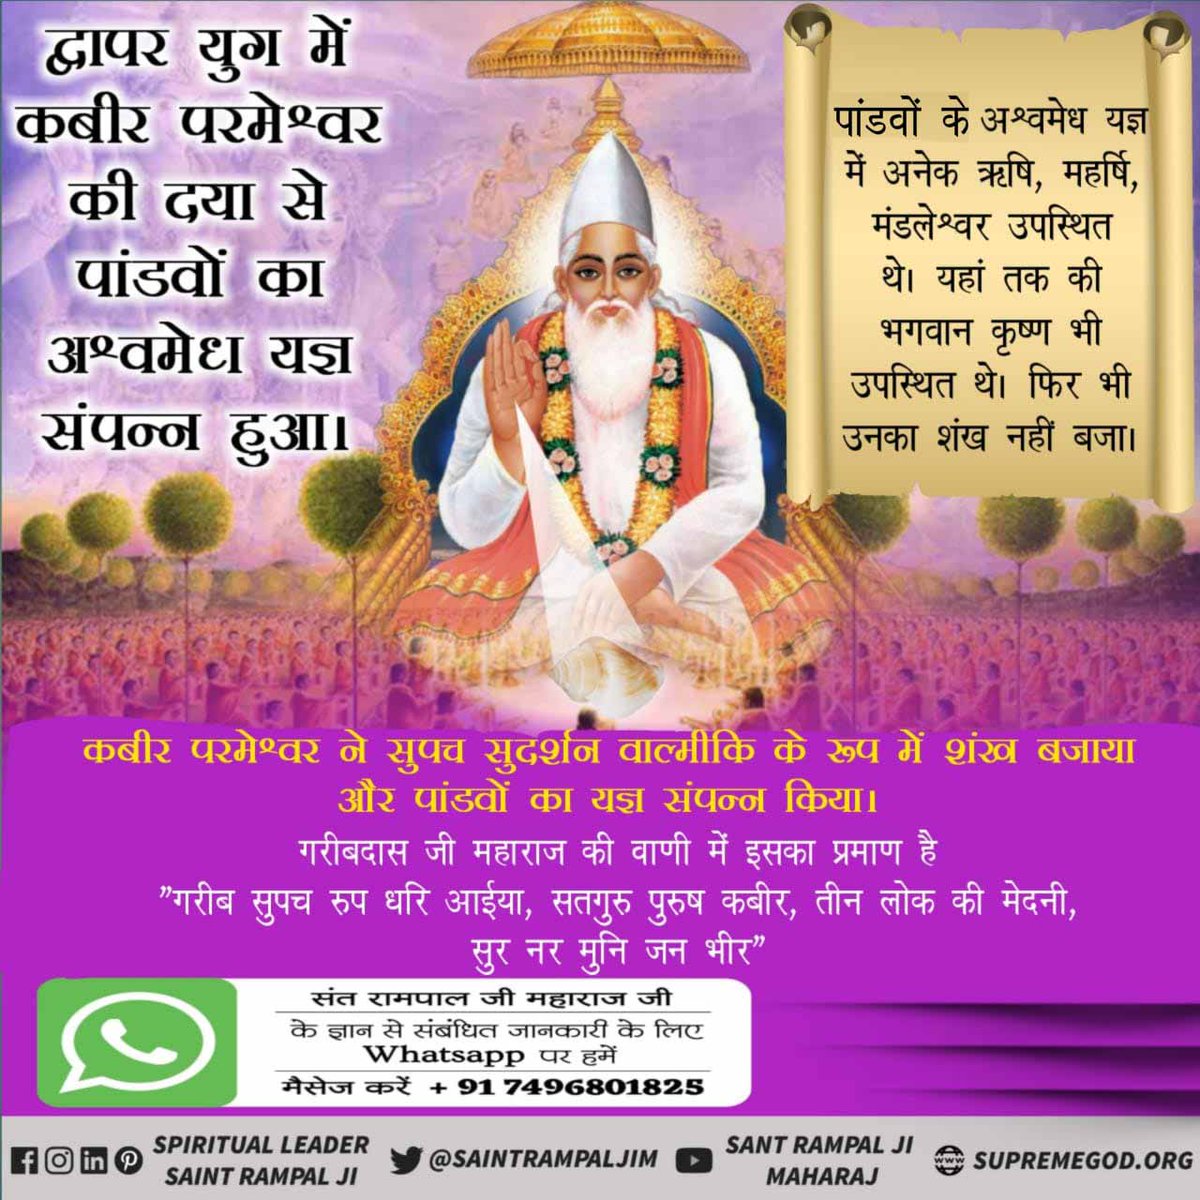 The Almighty God Kabir produced all the souls with His word power in His own form, in human form. #अविनाशी_परमात्मा_कबीर Sant Rampal Ji Maharaj